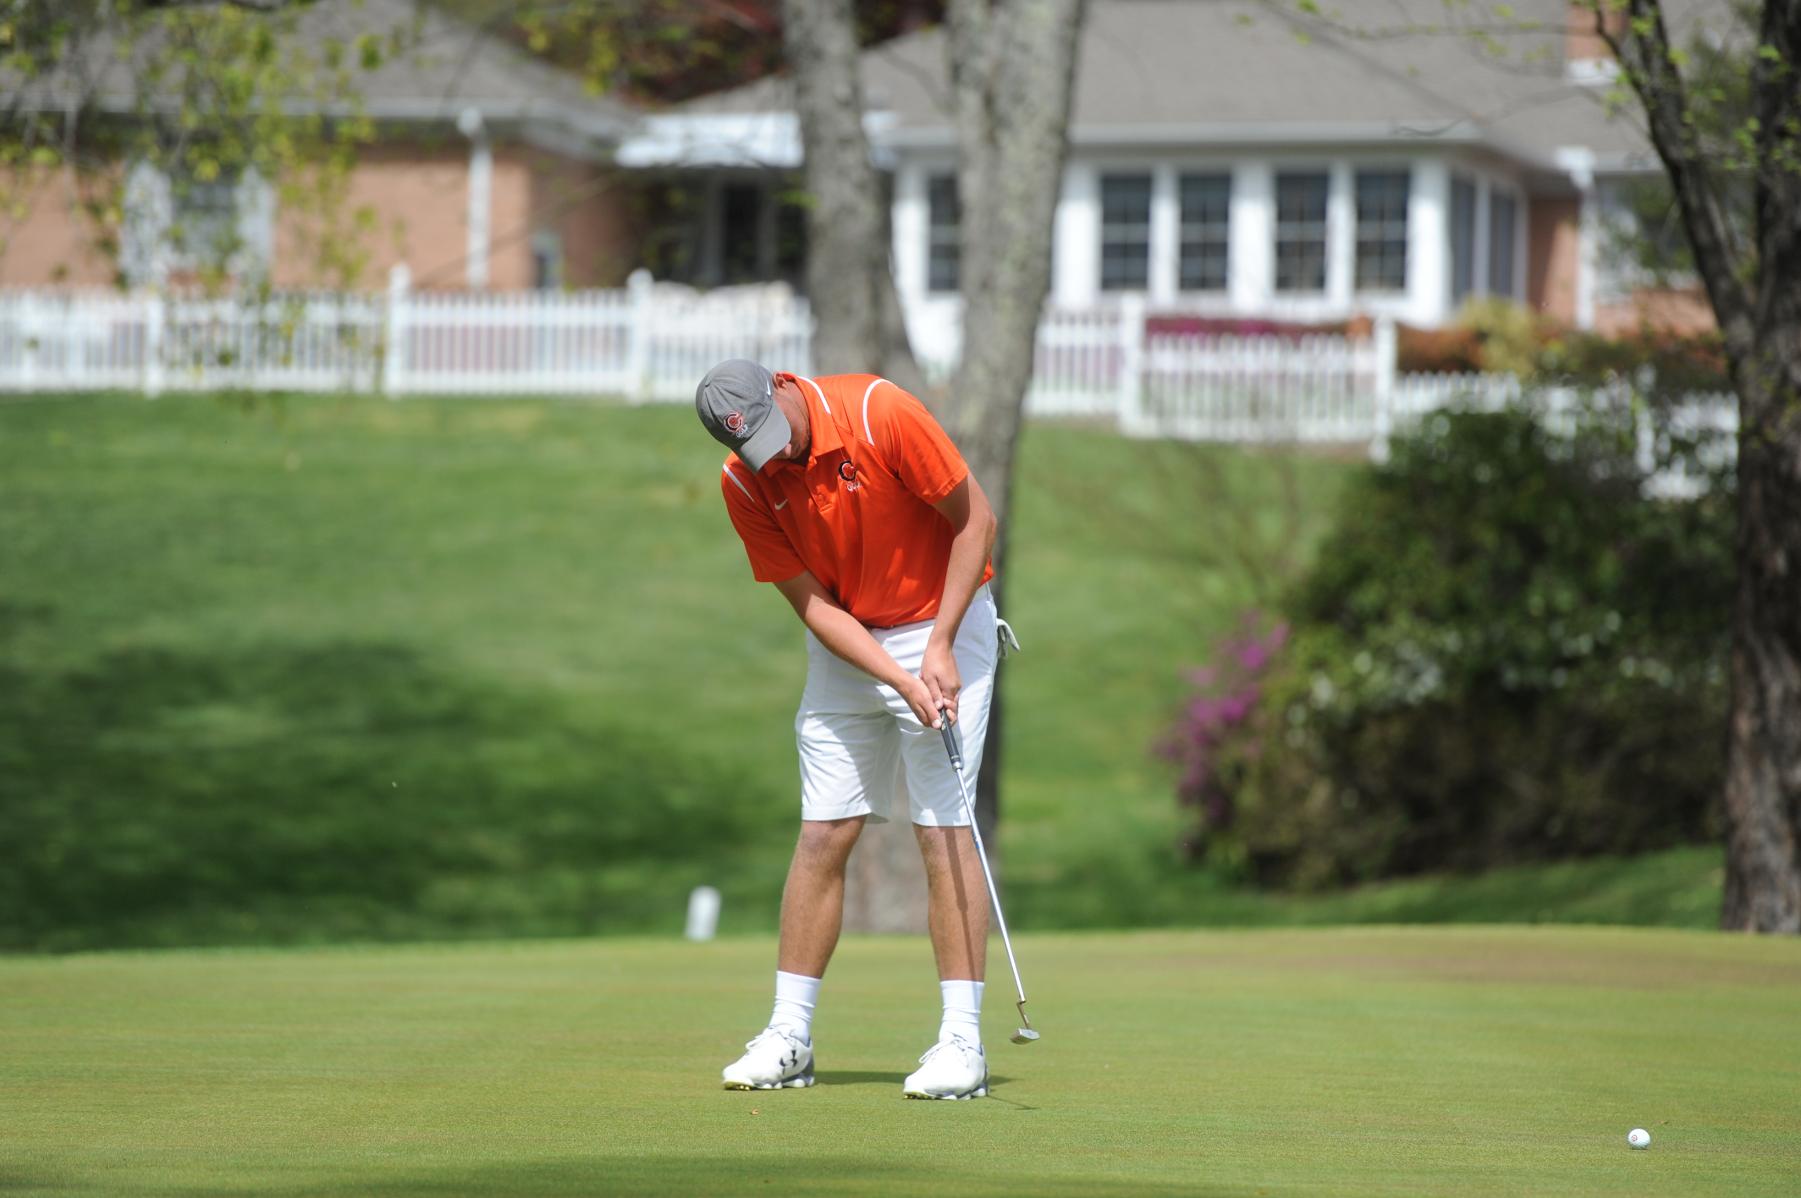 Senior duo leads Eagles during final round of South/Southeast Regional